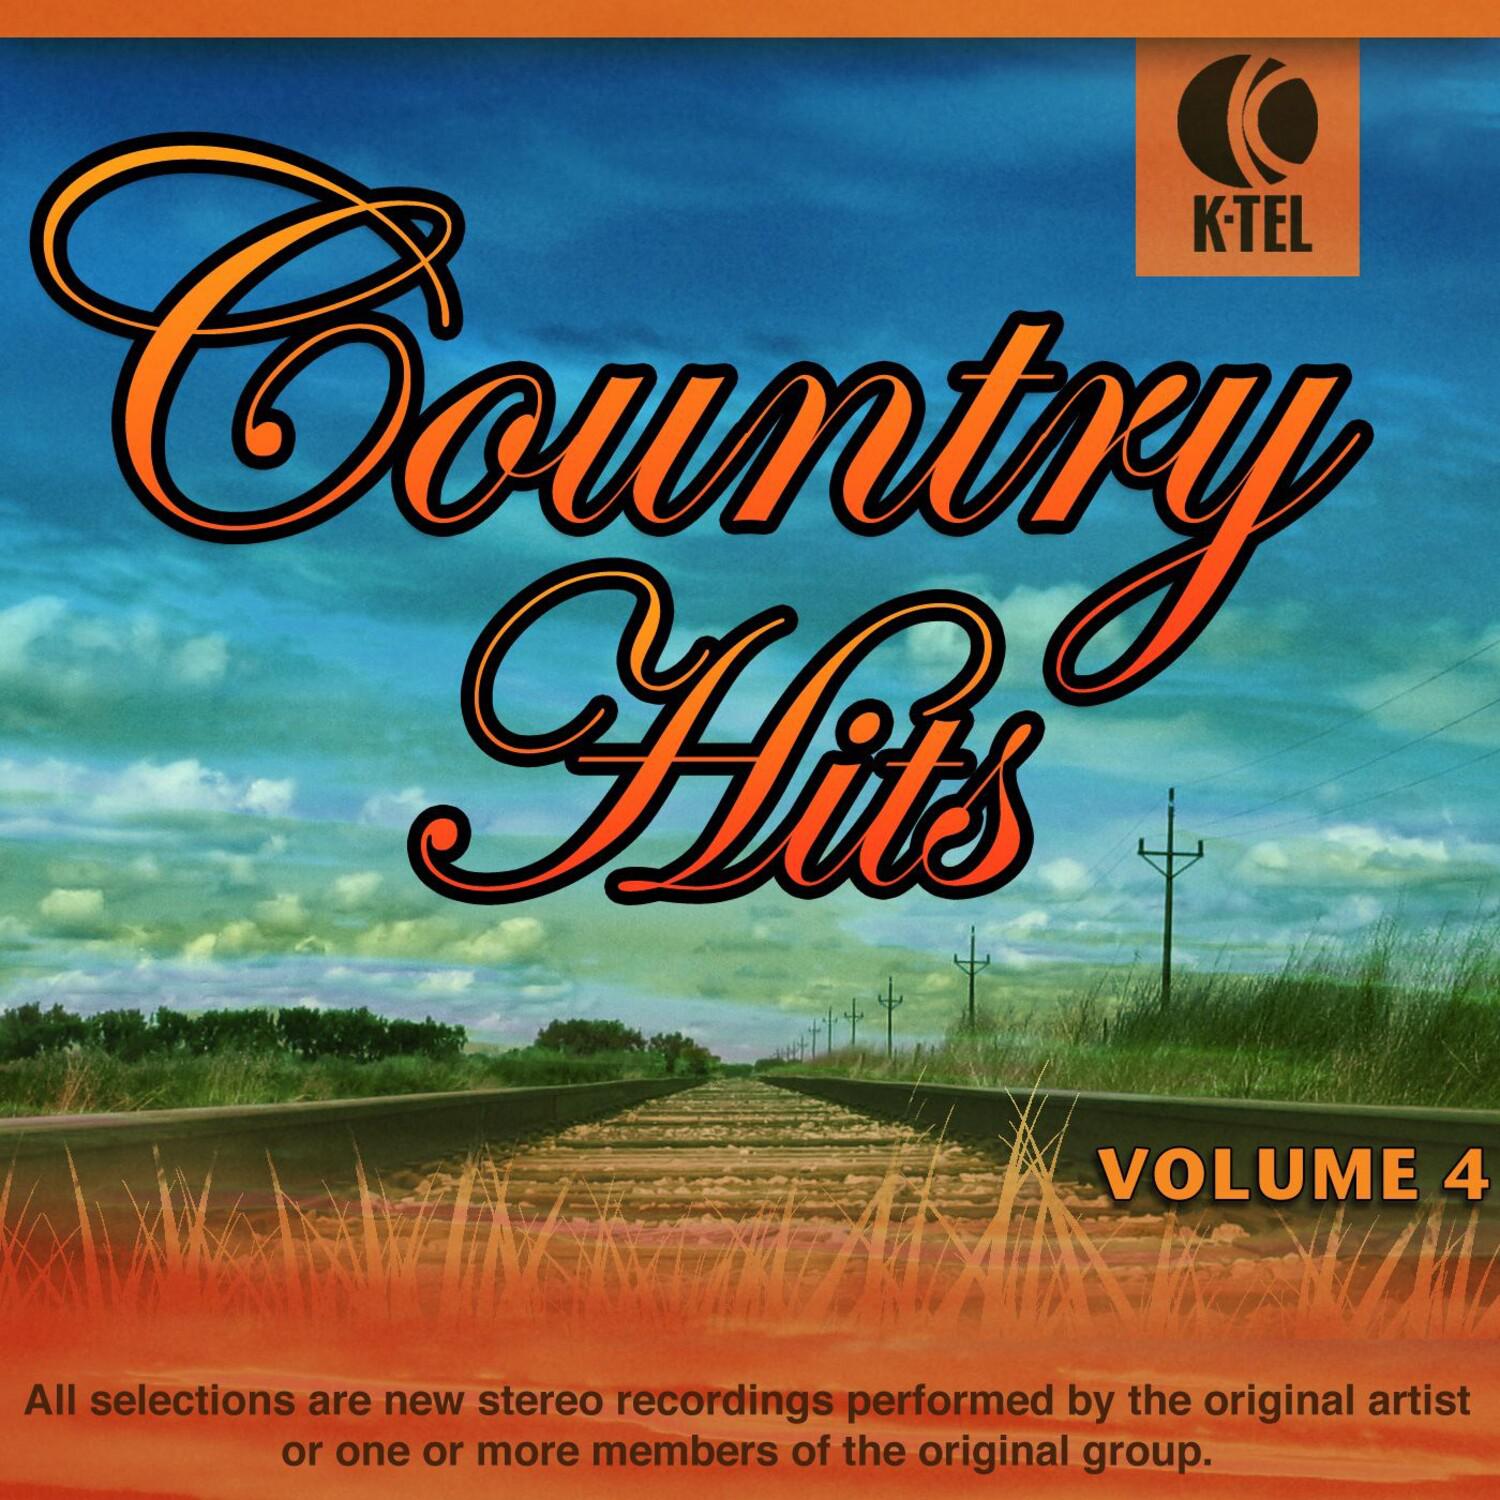 20 Great Country Hits - Vol. 4